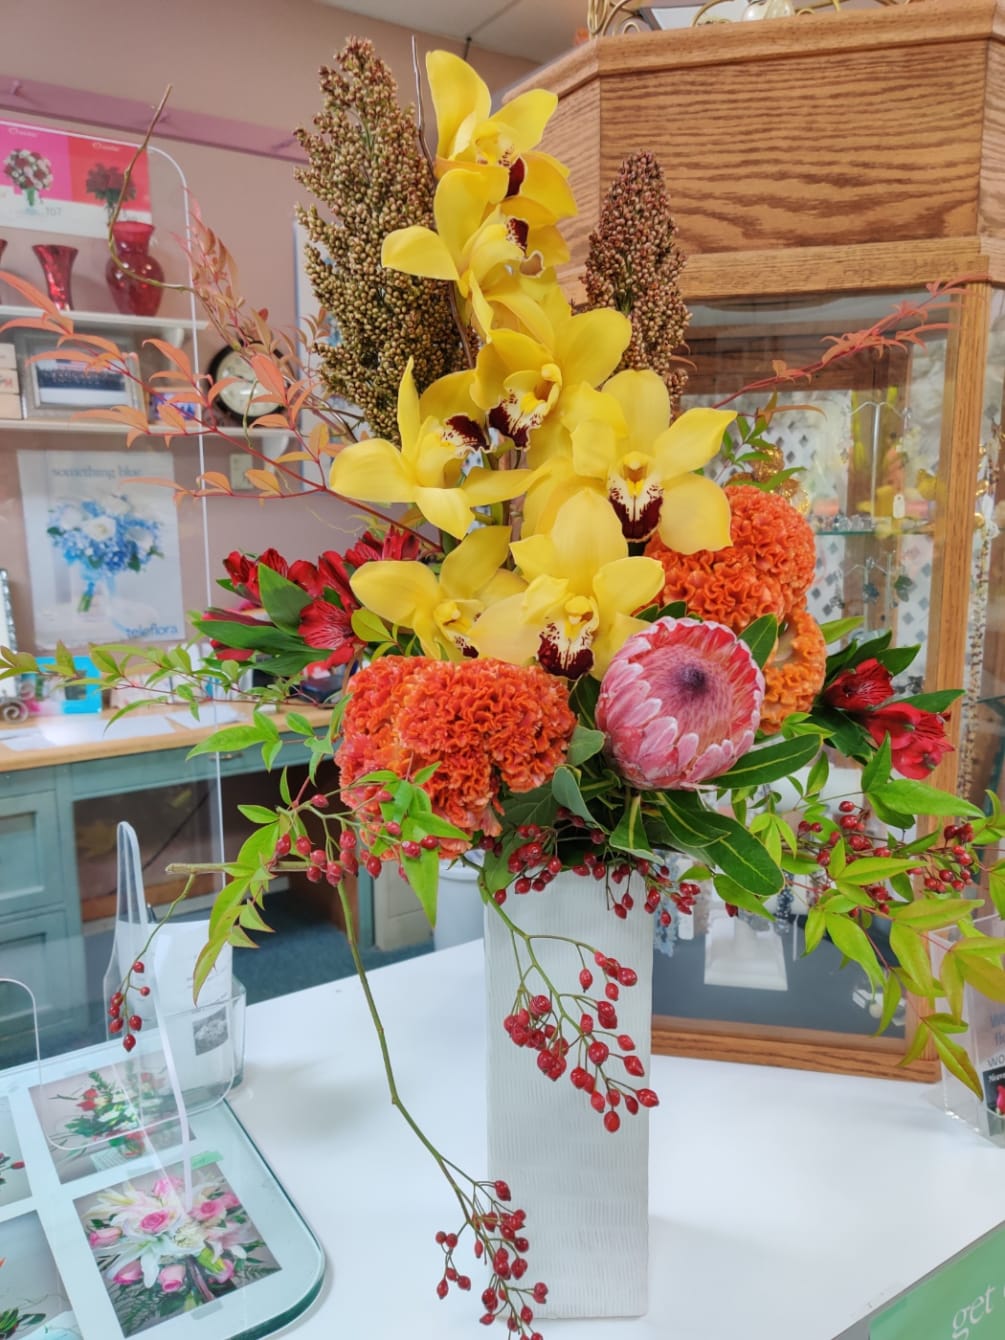 Contains Cymbidium Orchid, Protea, Cox, Alstromaria, Red berry branch in a tall